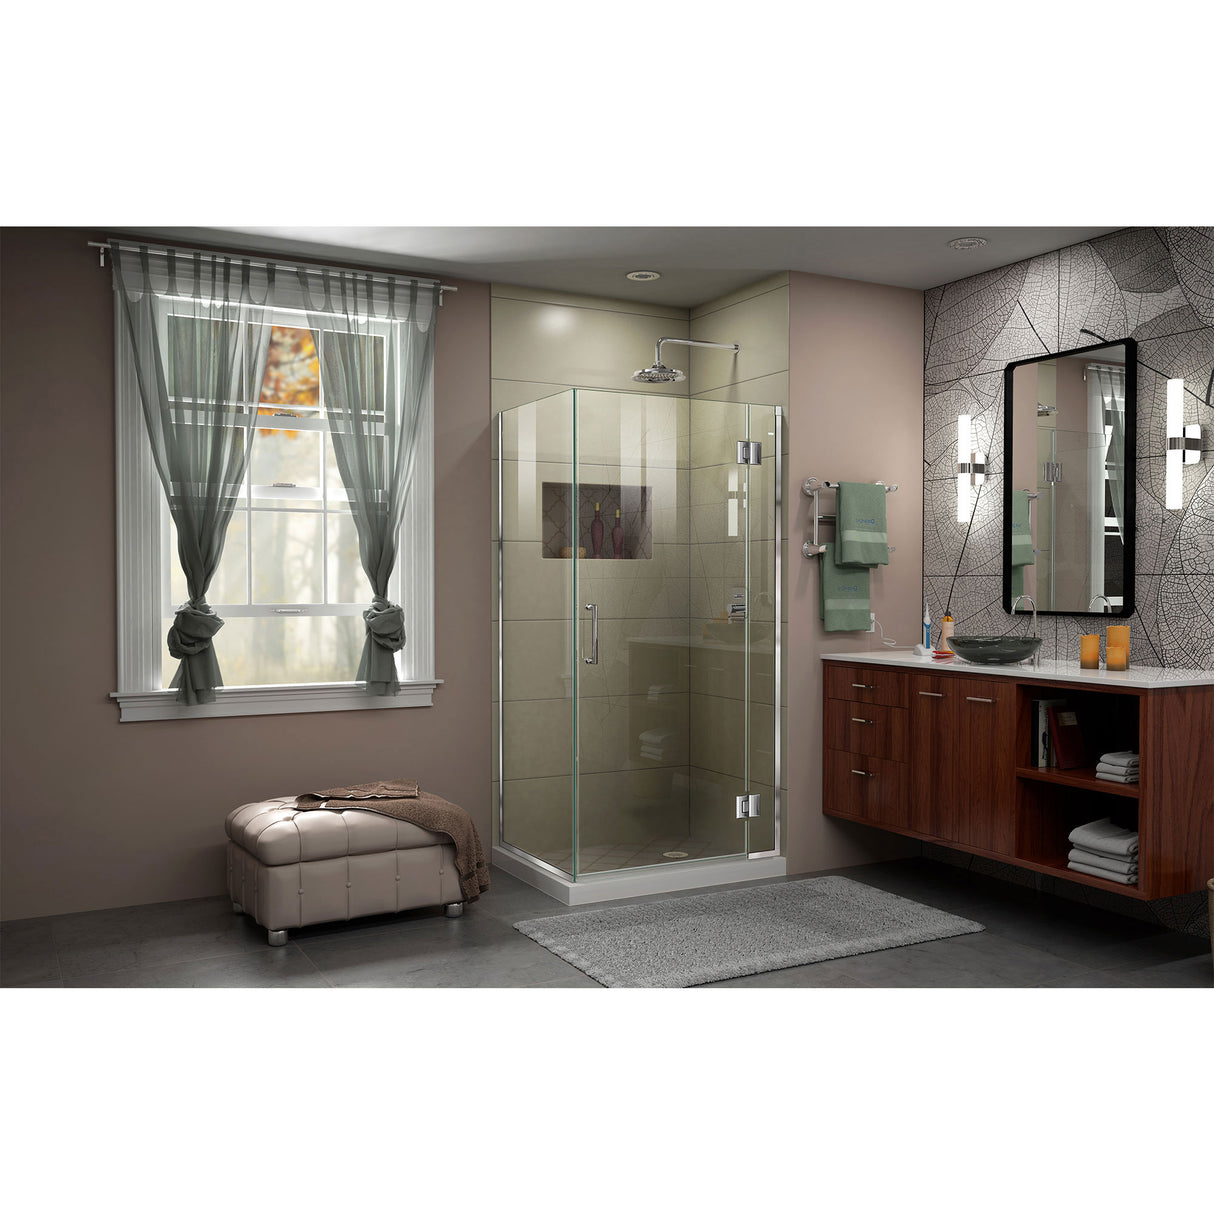 DreamLine Unidoor-X 36 3/8 in. W x 30 in. D x 72 in. H Frameless Hinged Shower Enclosure in Chrome